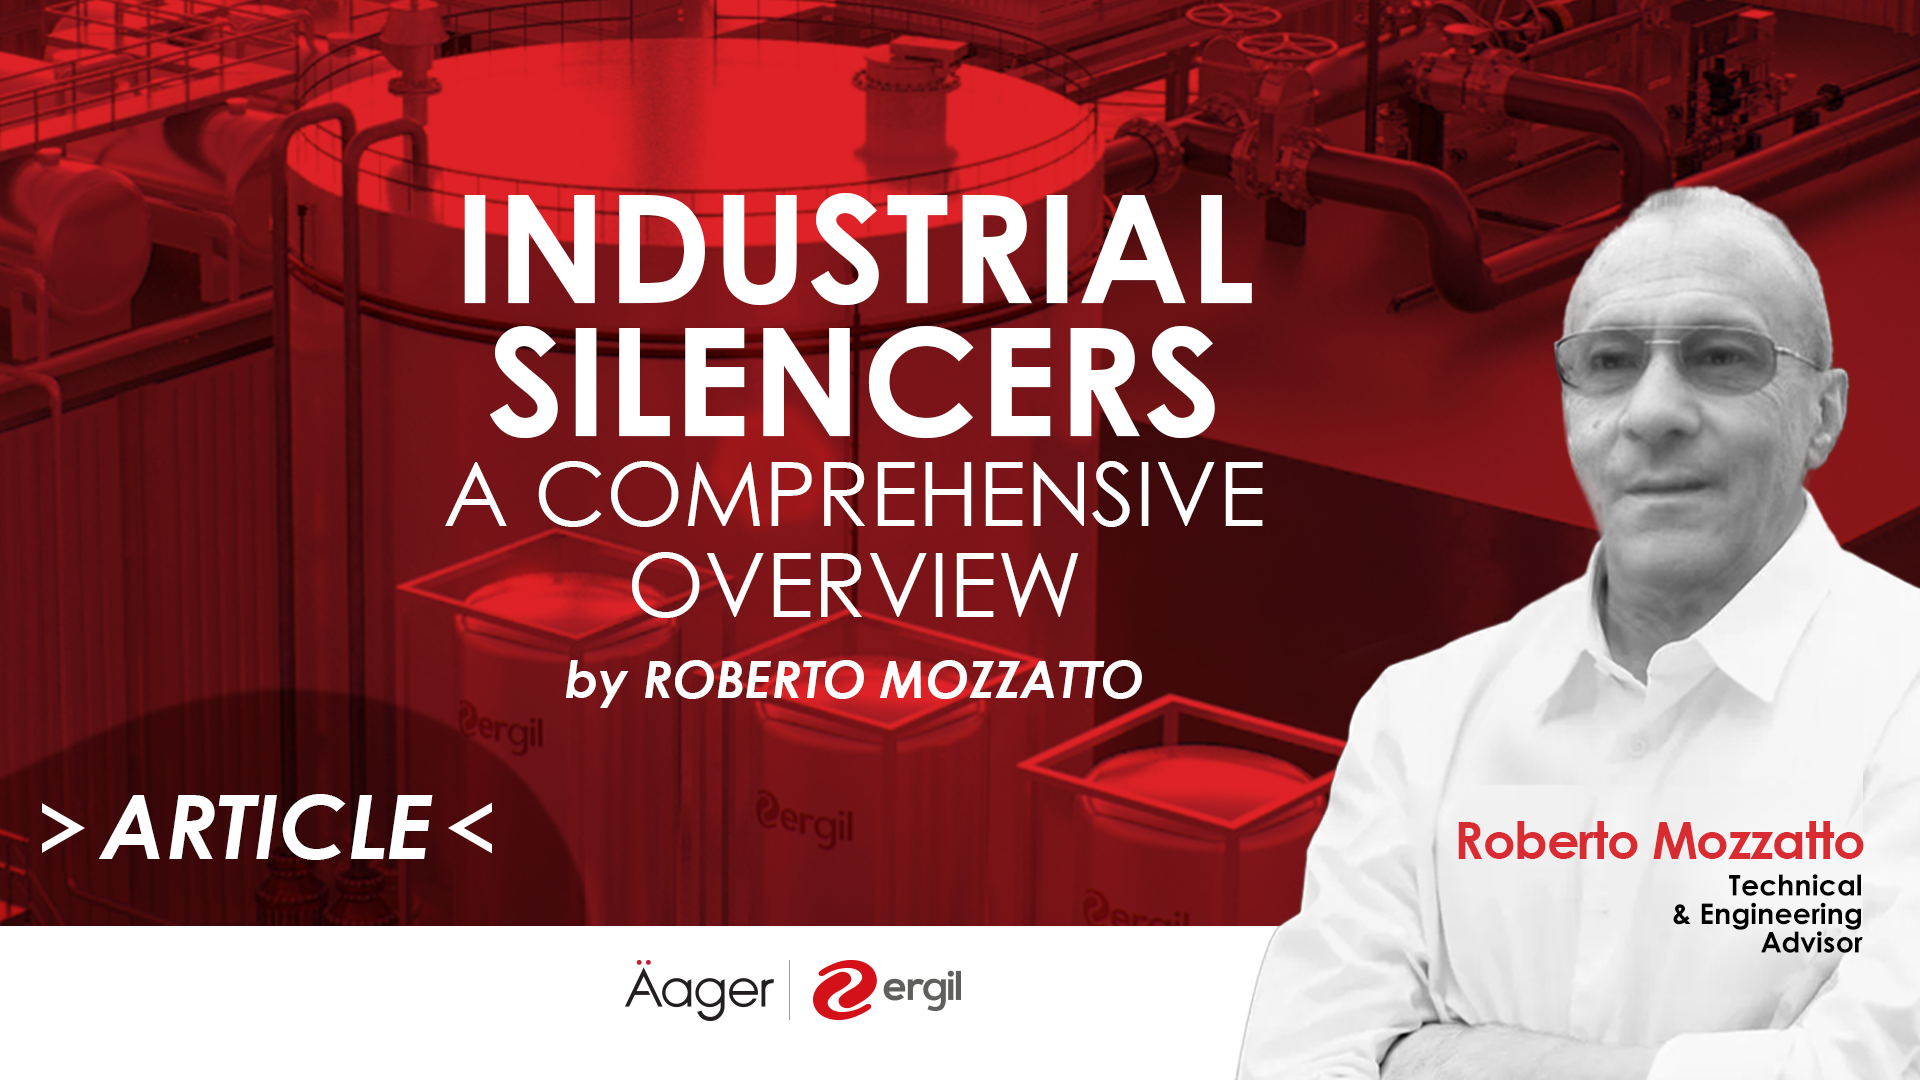 Industrial Silencers: A Comprehensive Overview with Roberto Mozzatto 38